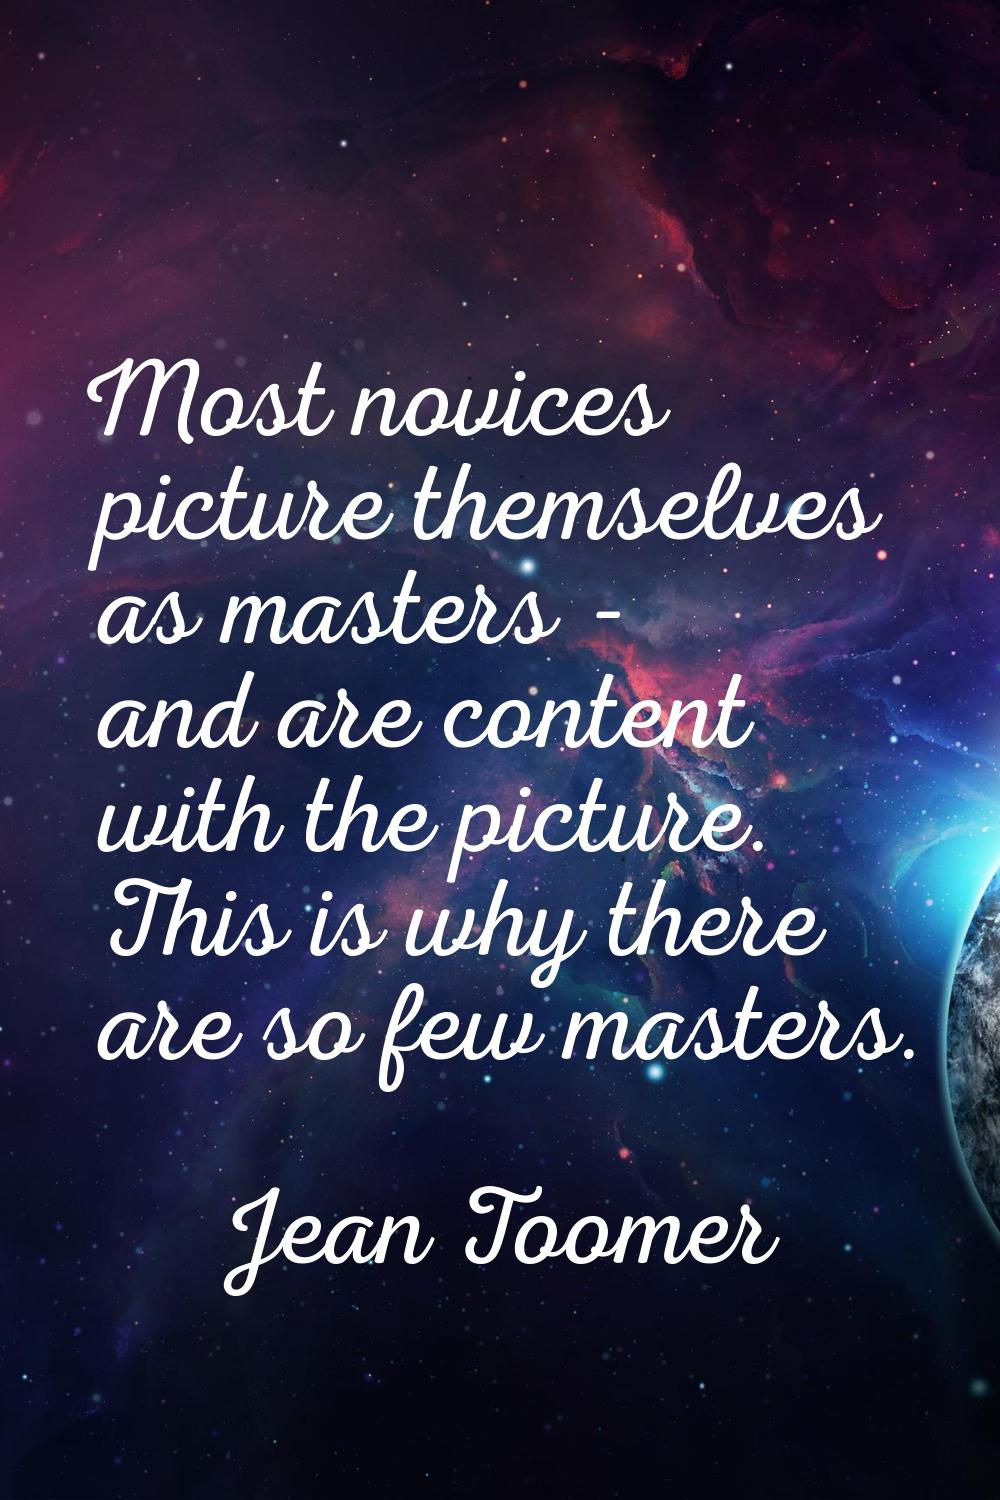 Most novices picture themselves as masters - and are content with the picture. This is why there ar